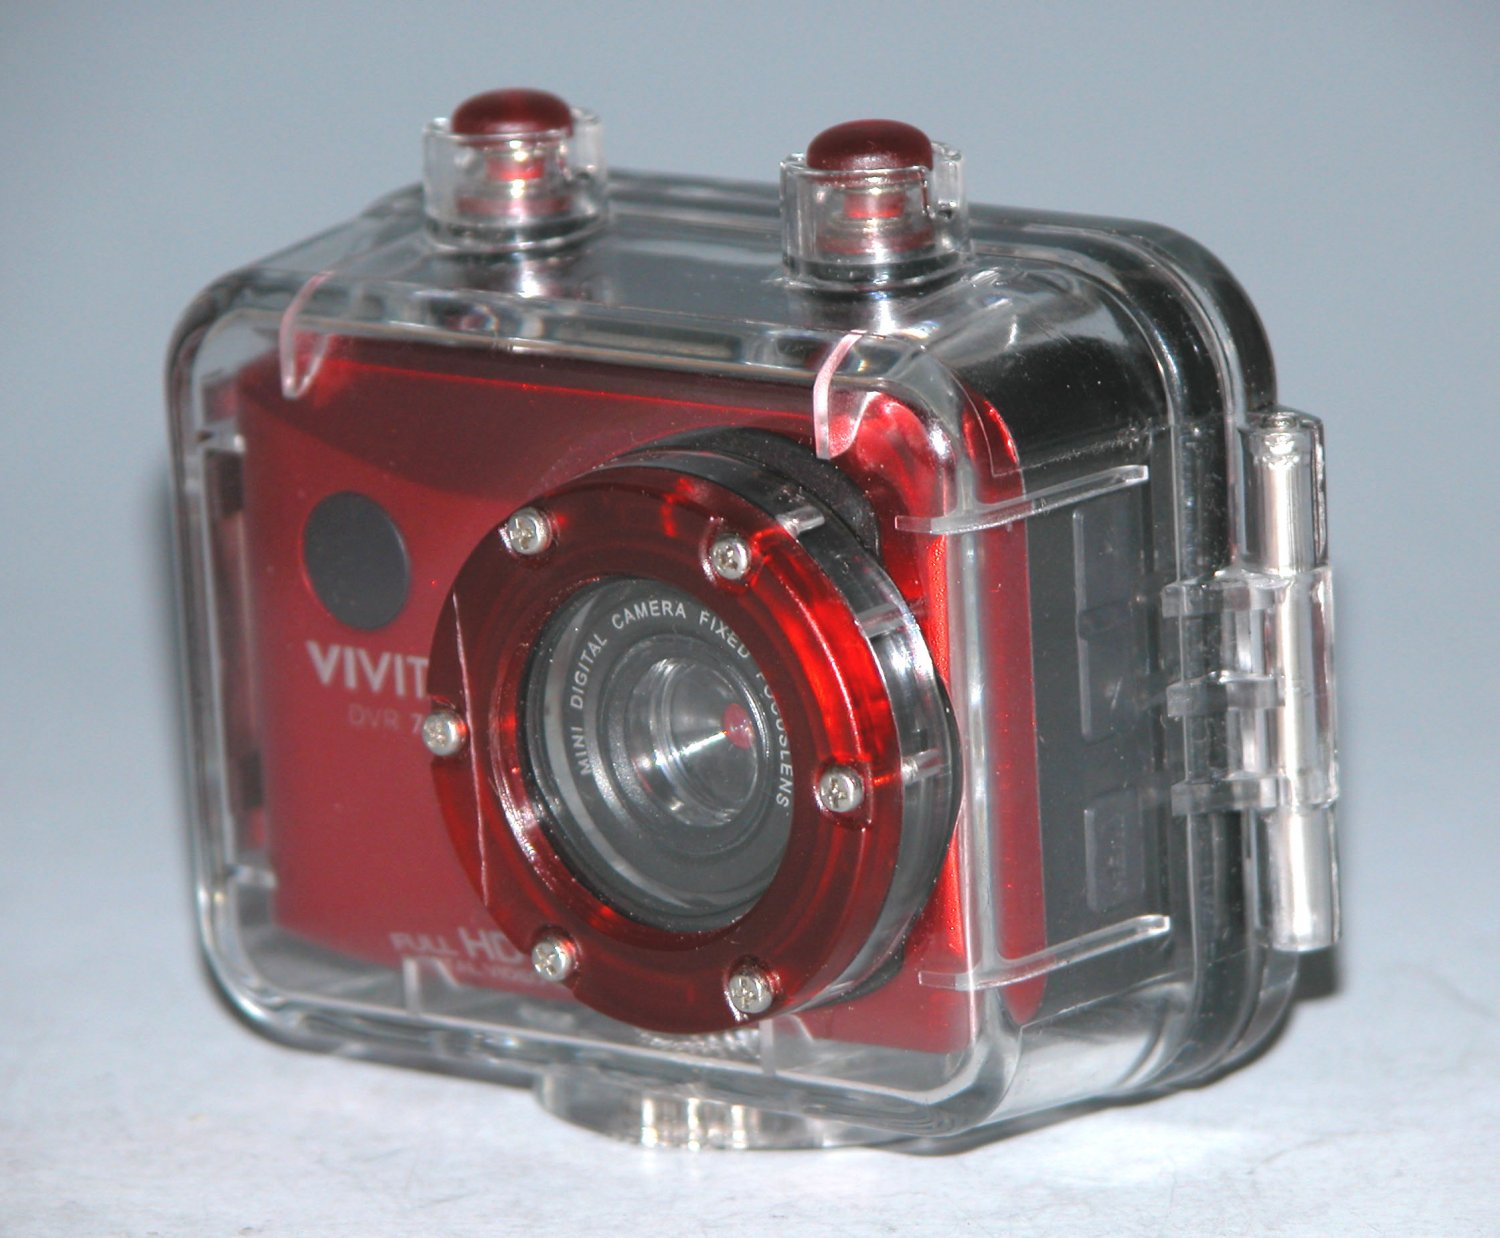 Vivitar DVR 786HD Camcorders Sport 720 Pixels Camera with Camera Housing - Red